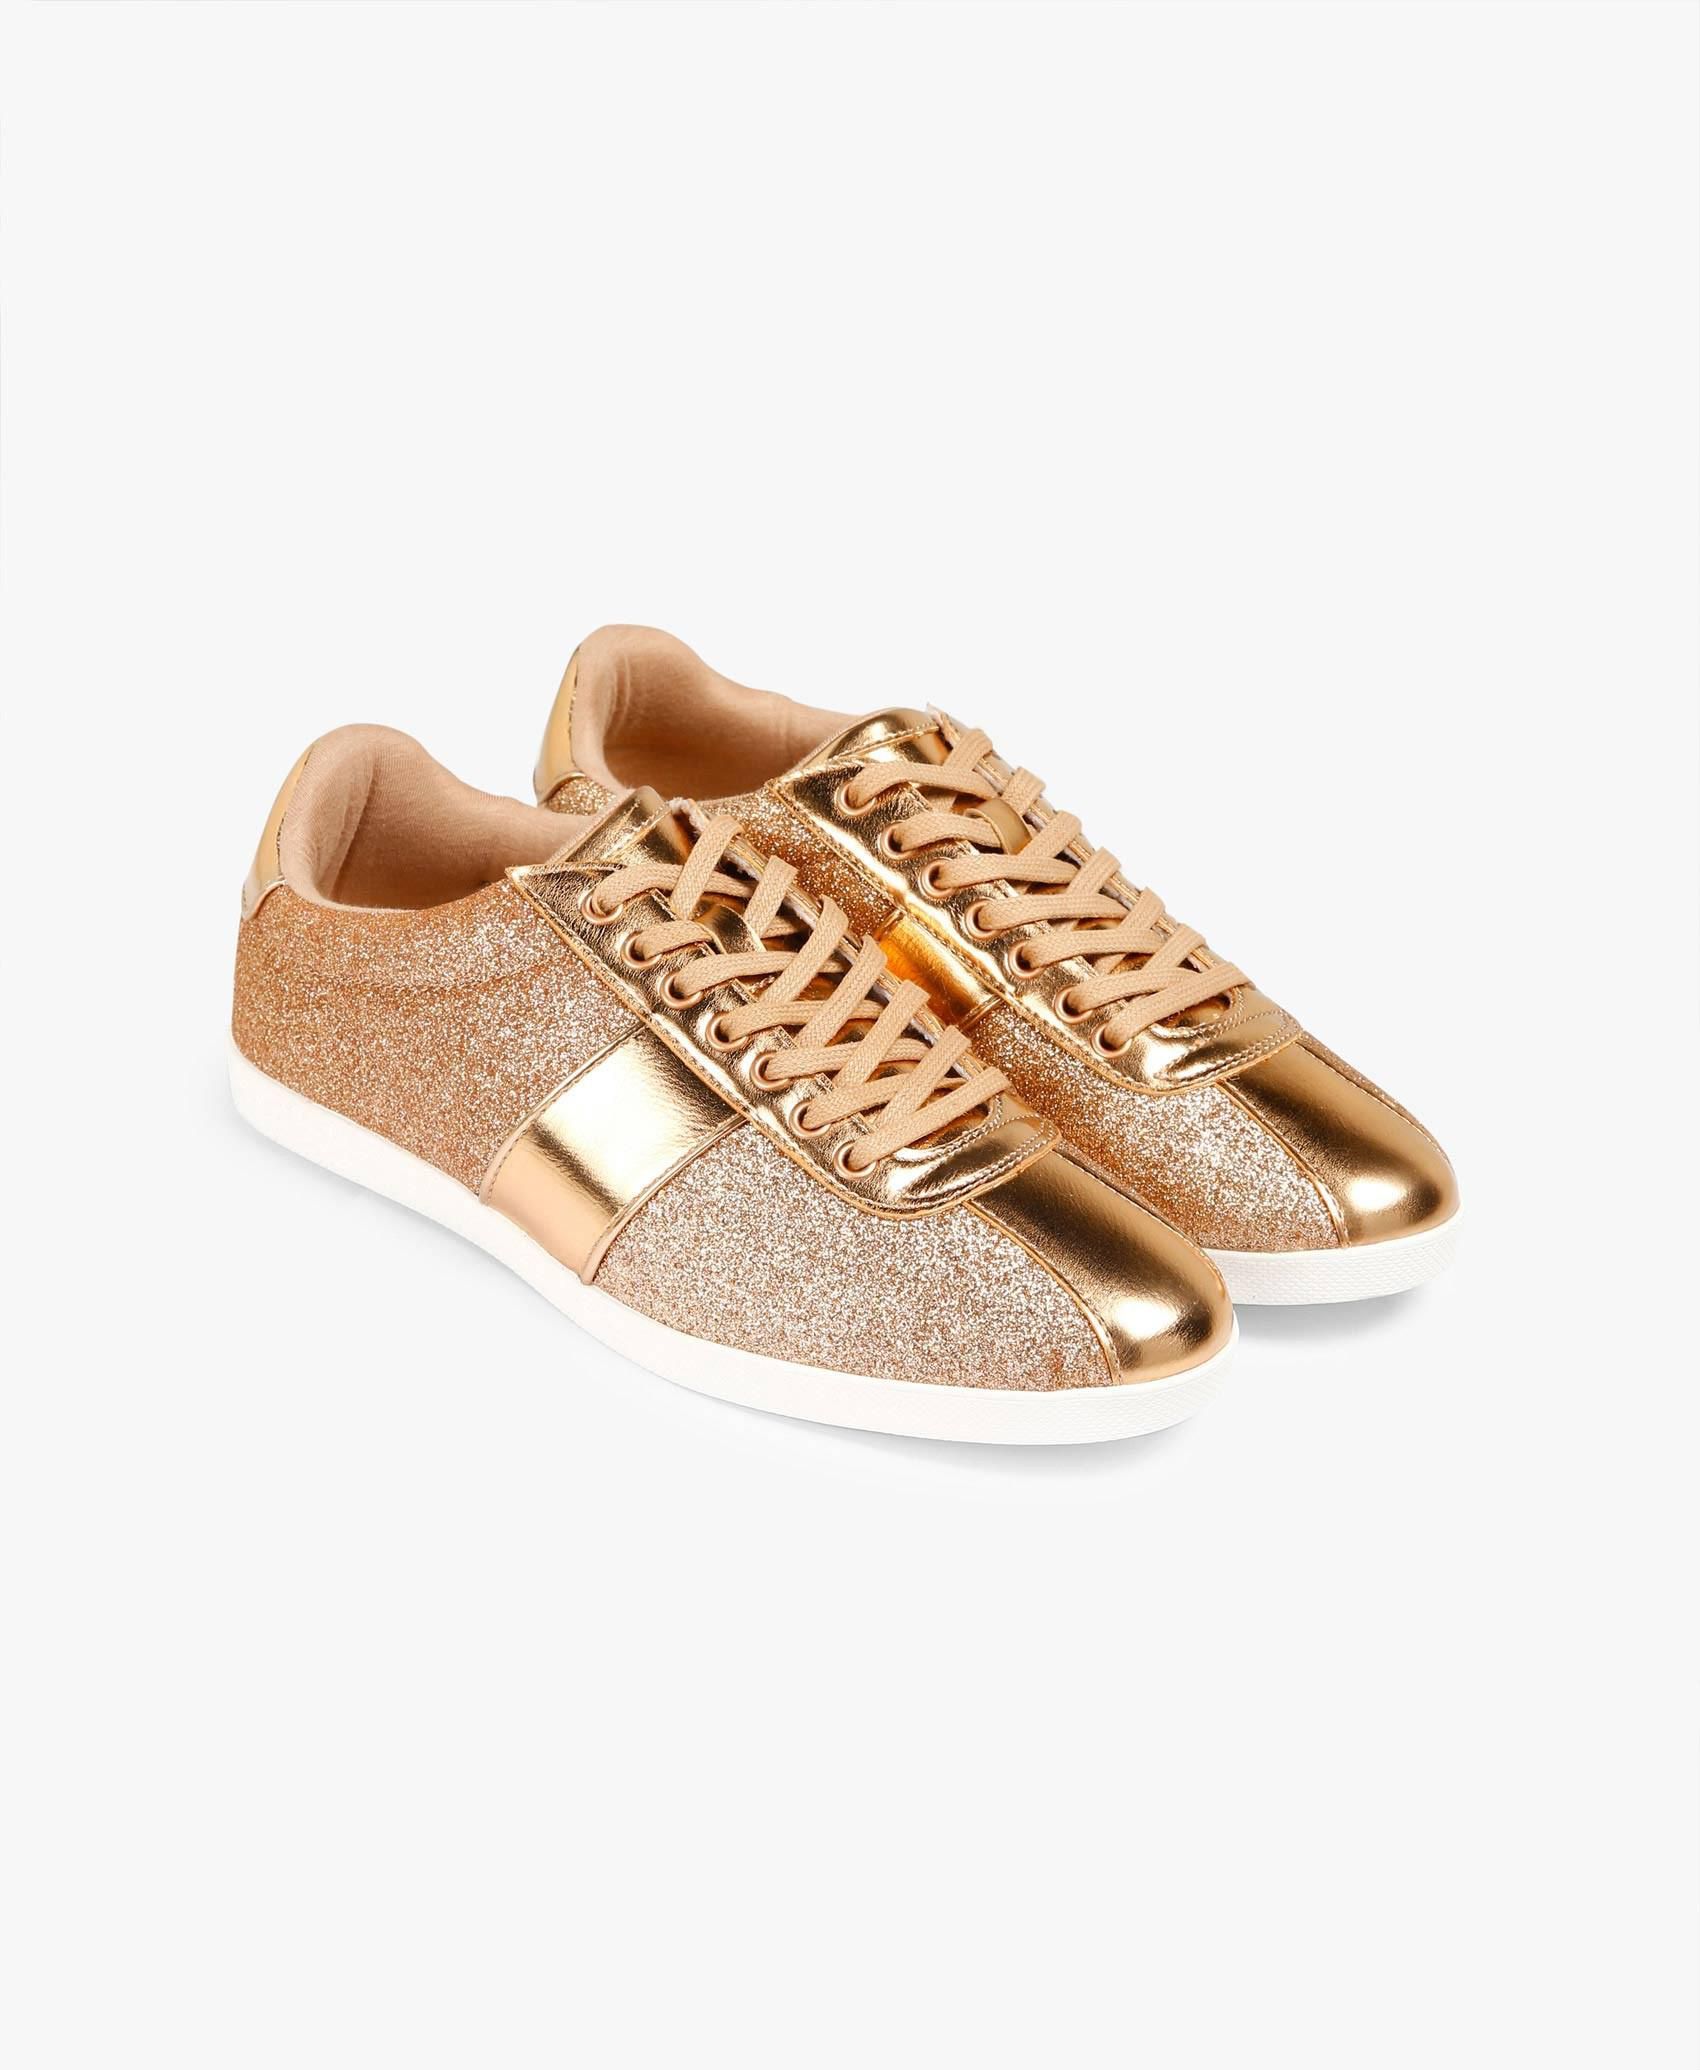 Copper Noramann Sneakers